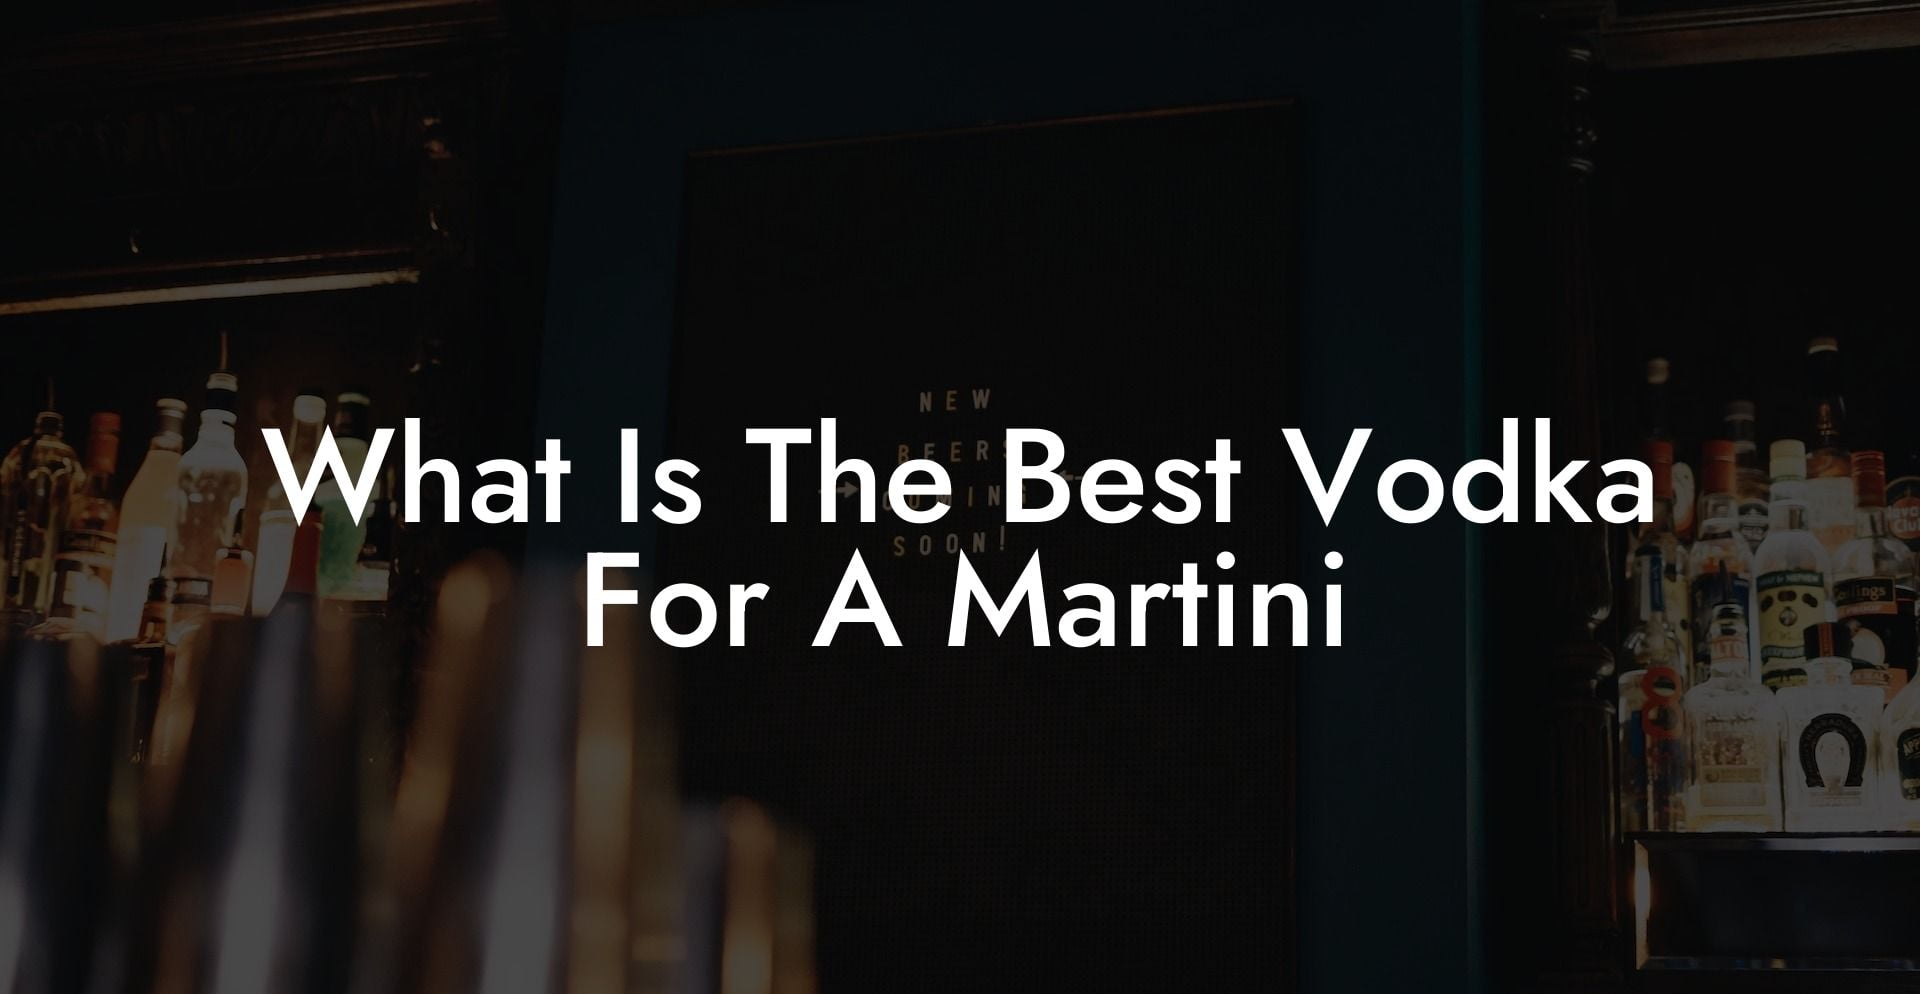 What Is The Best Vodka For A Martini